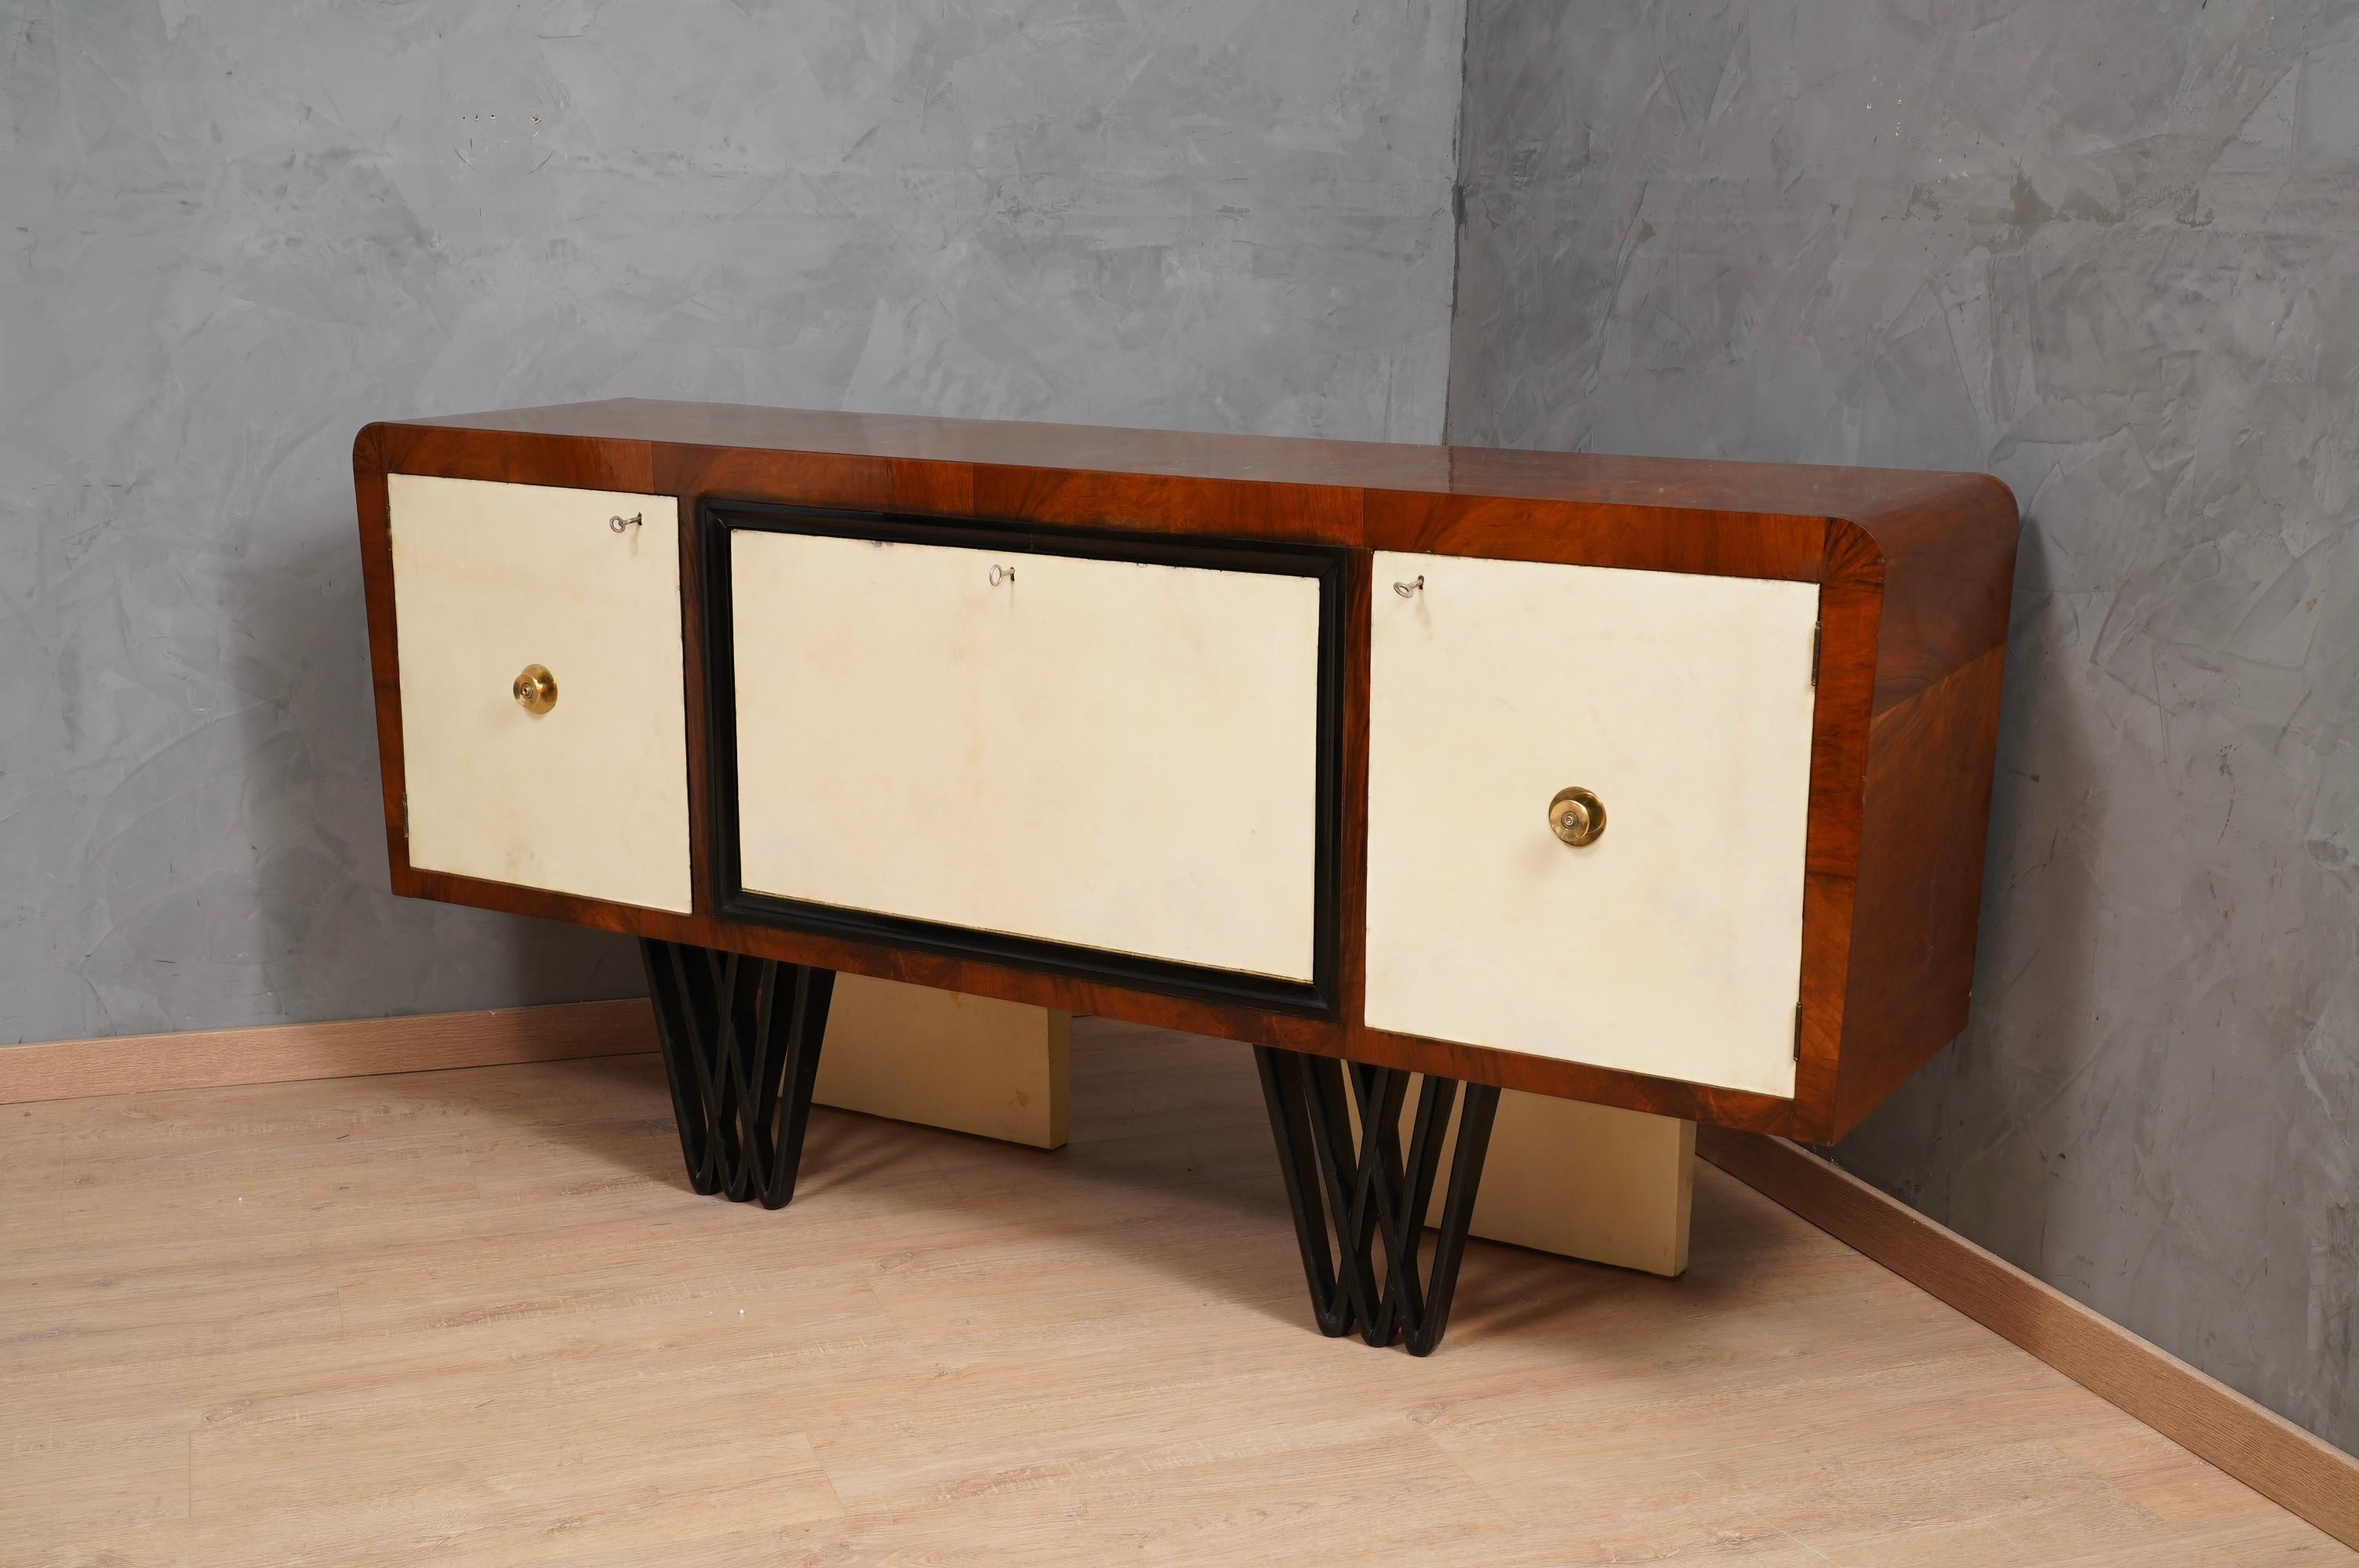 Beautiful bar cabinet in characteristic Italian style of Paolo Buffa, Vittorio Dassi and Osvaldo Borsani. This bar has a very luxurious appearance, due the use of not common materials.

From Italian style, this sideboard is made of walnut wood and